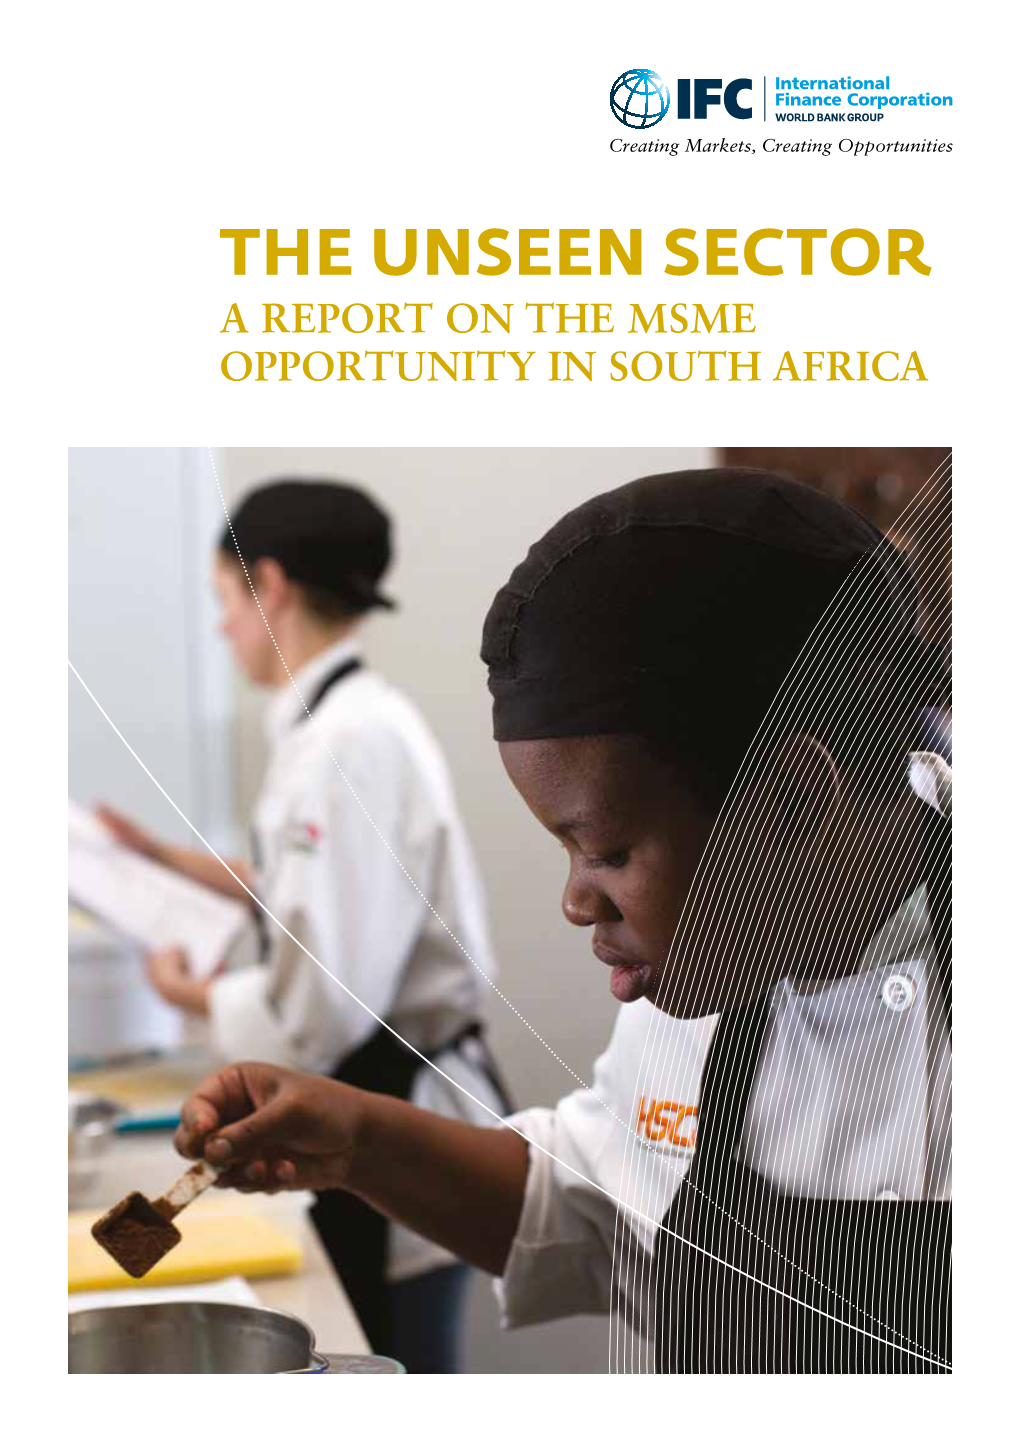 The Unseen Sector: a Report on the MSME Opportunity in South Africa